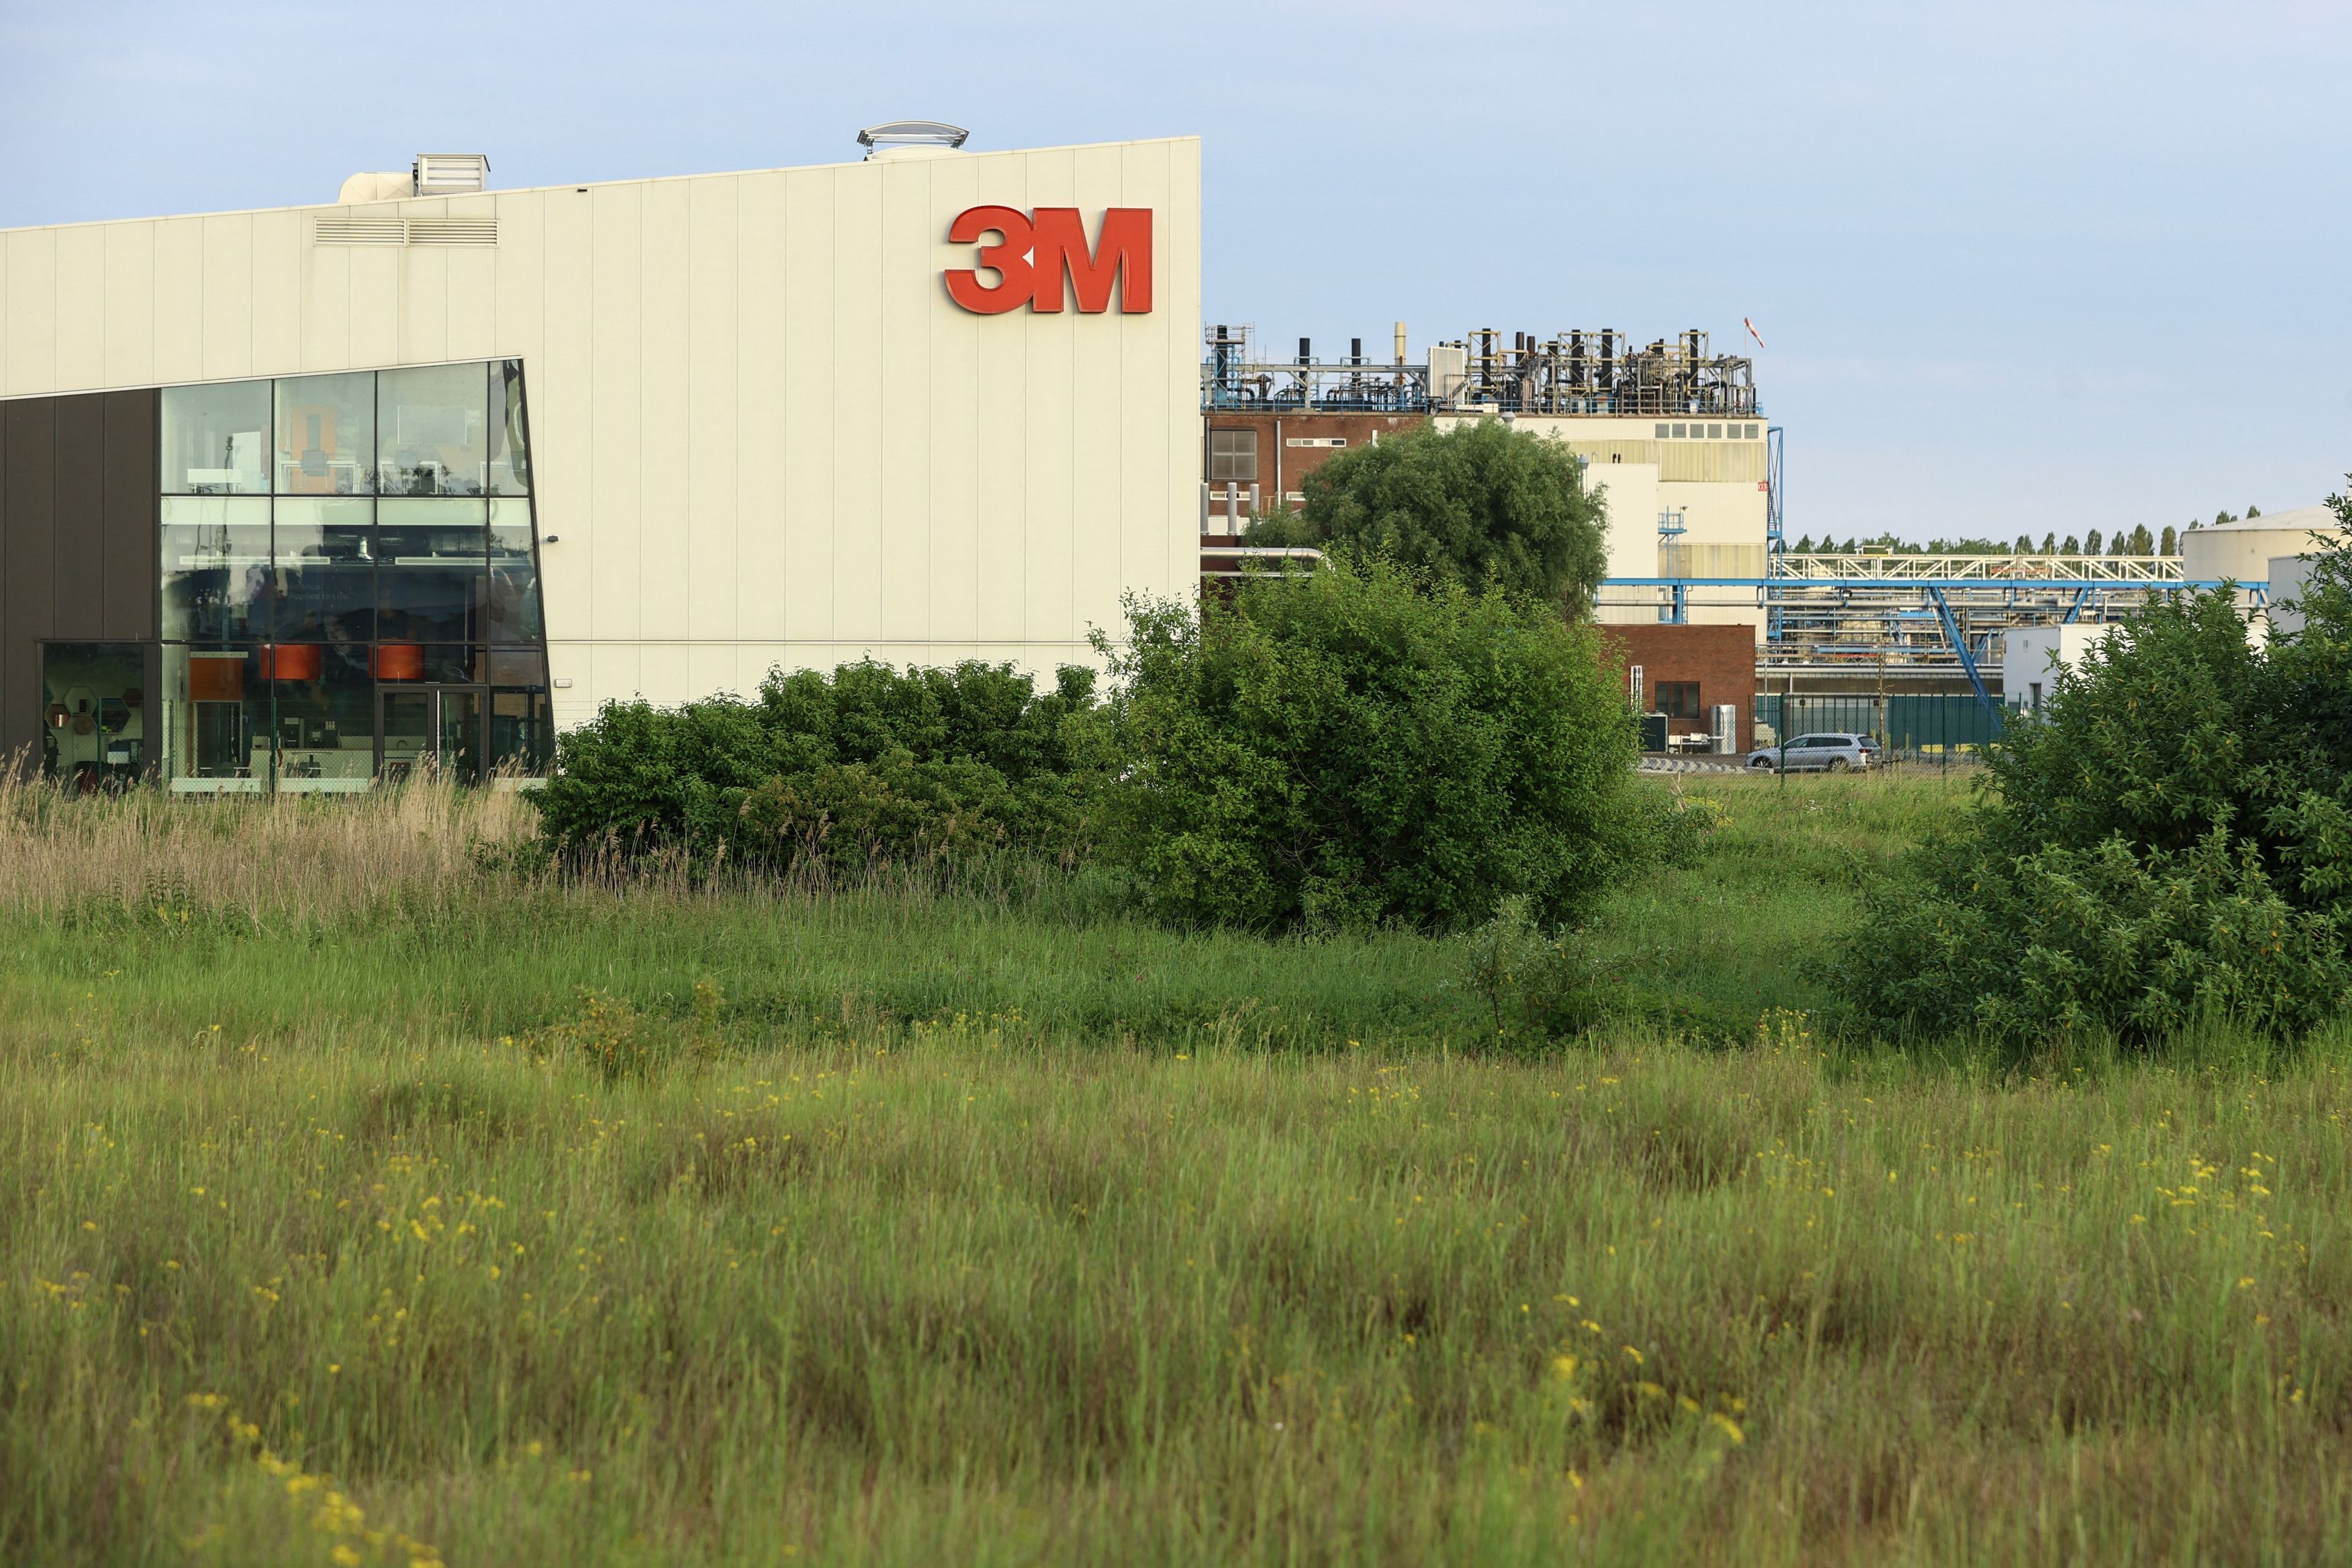 3M, along with DuPont, are the targets of a new study alleging decades of covering up the dangers of PFAS (BELGA/AFP via Getty Images)